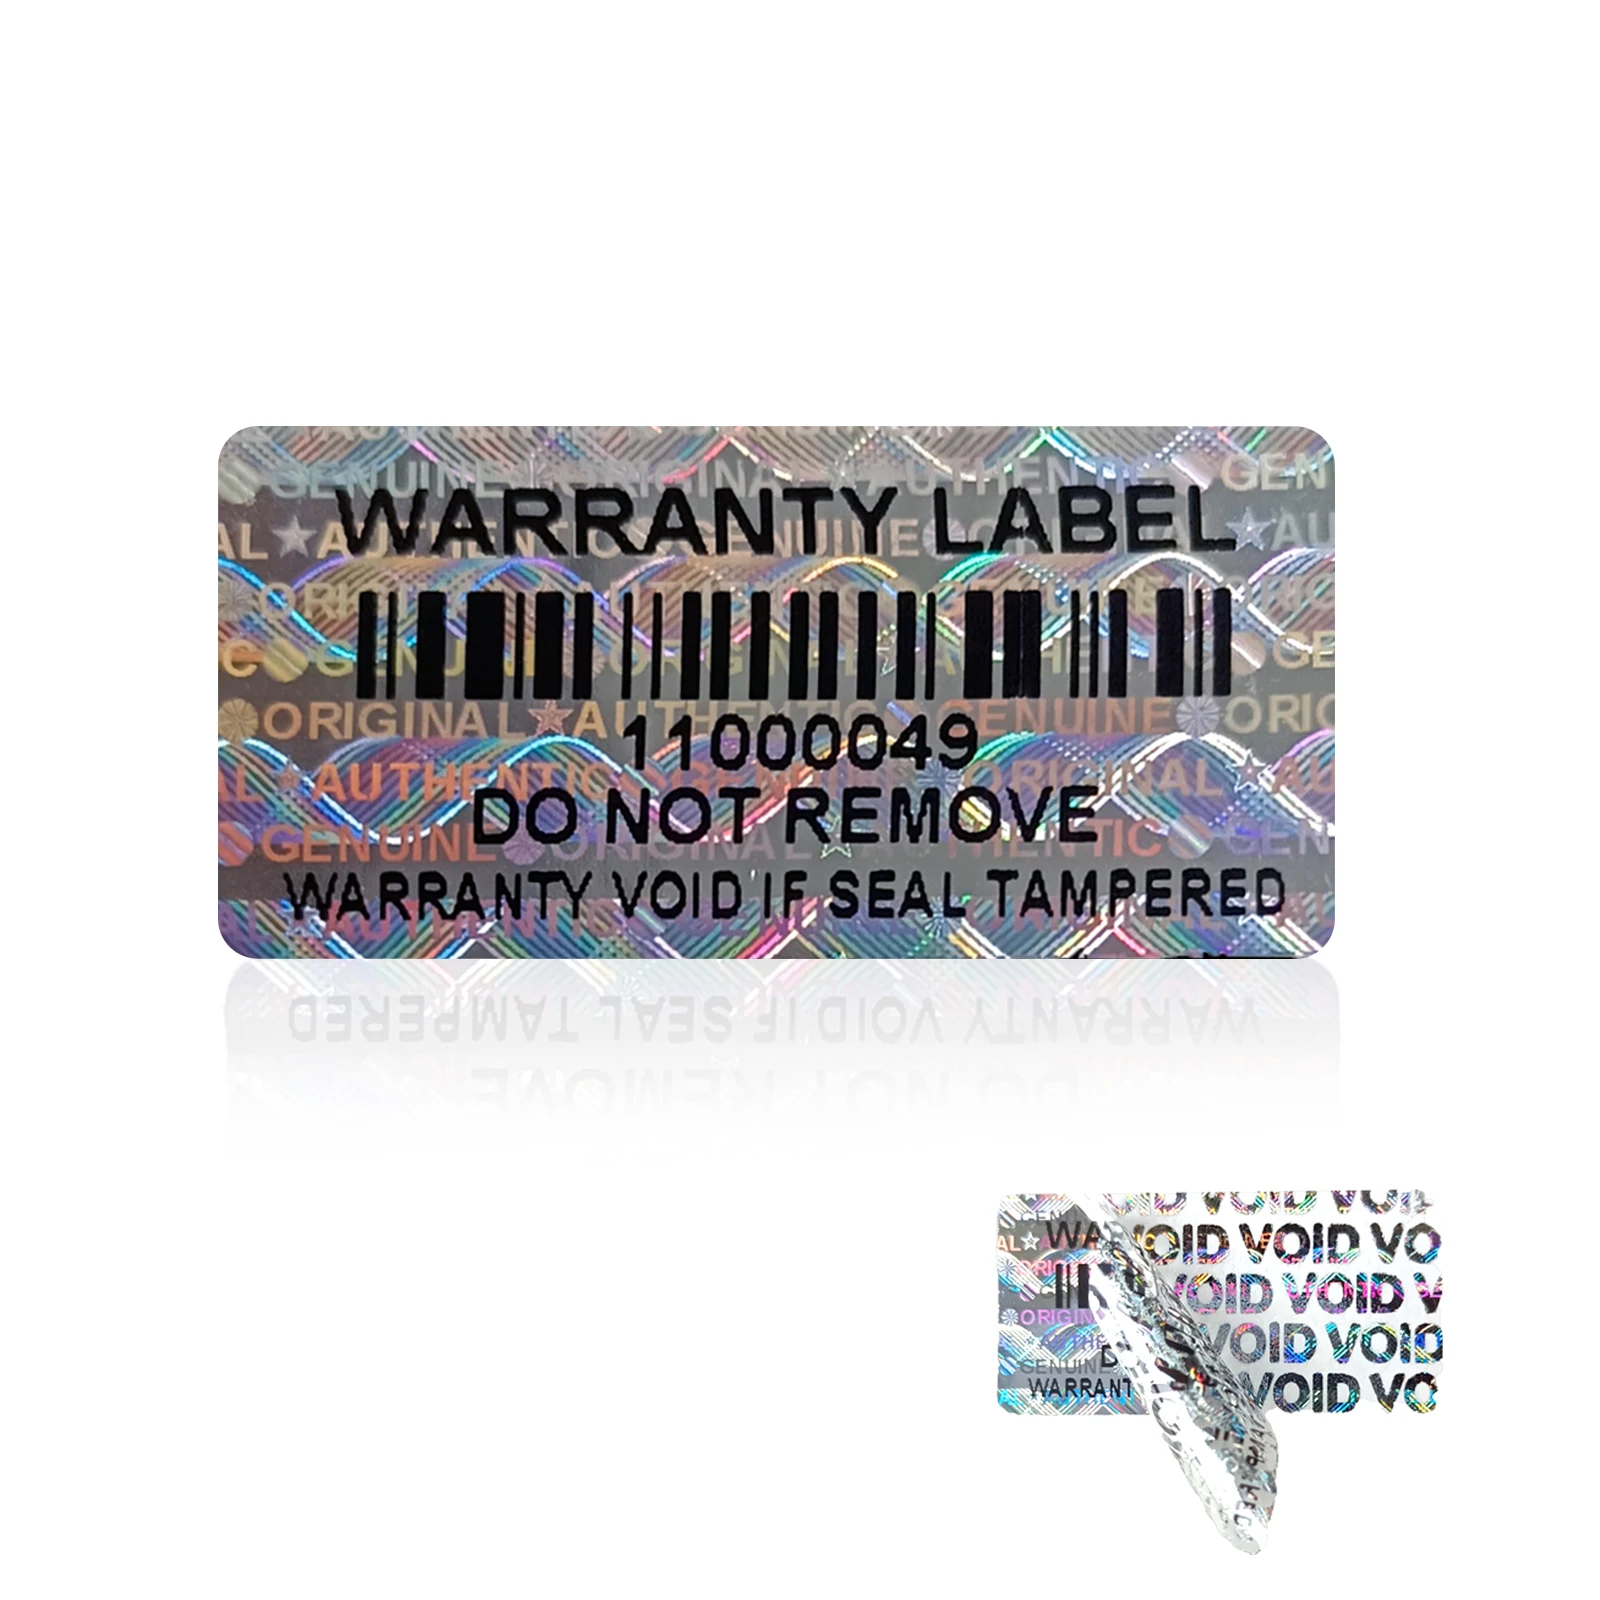 3x1.5cm Tamper Proof holographic Stickers with bar Code Hologram Security Labels Genuine Warranty Seal with Unique Serial Number